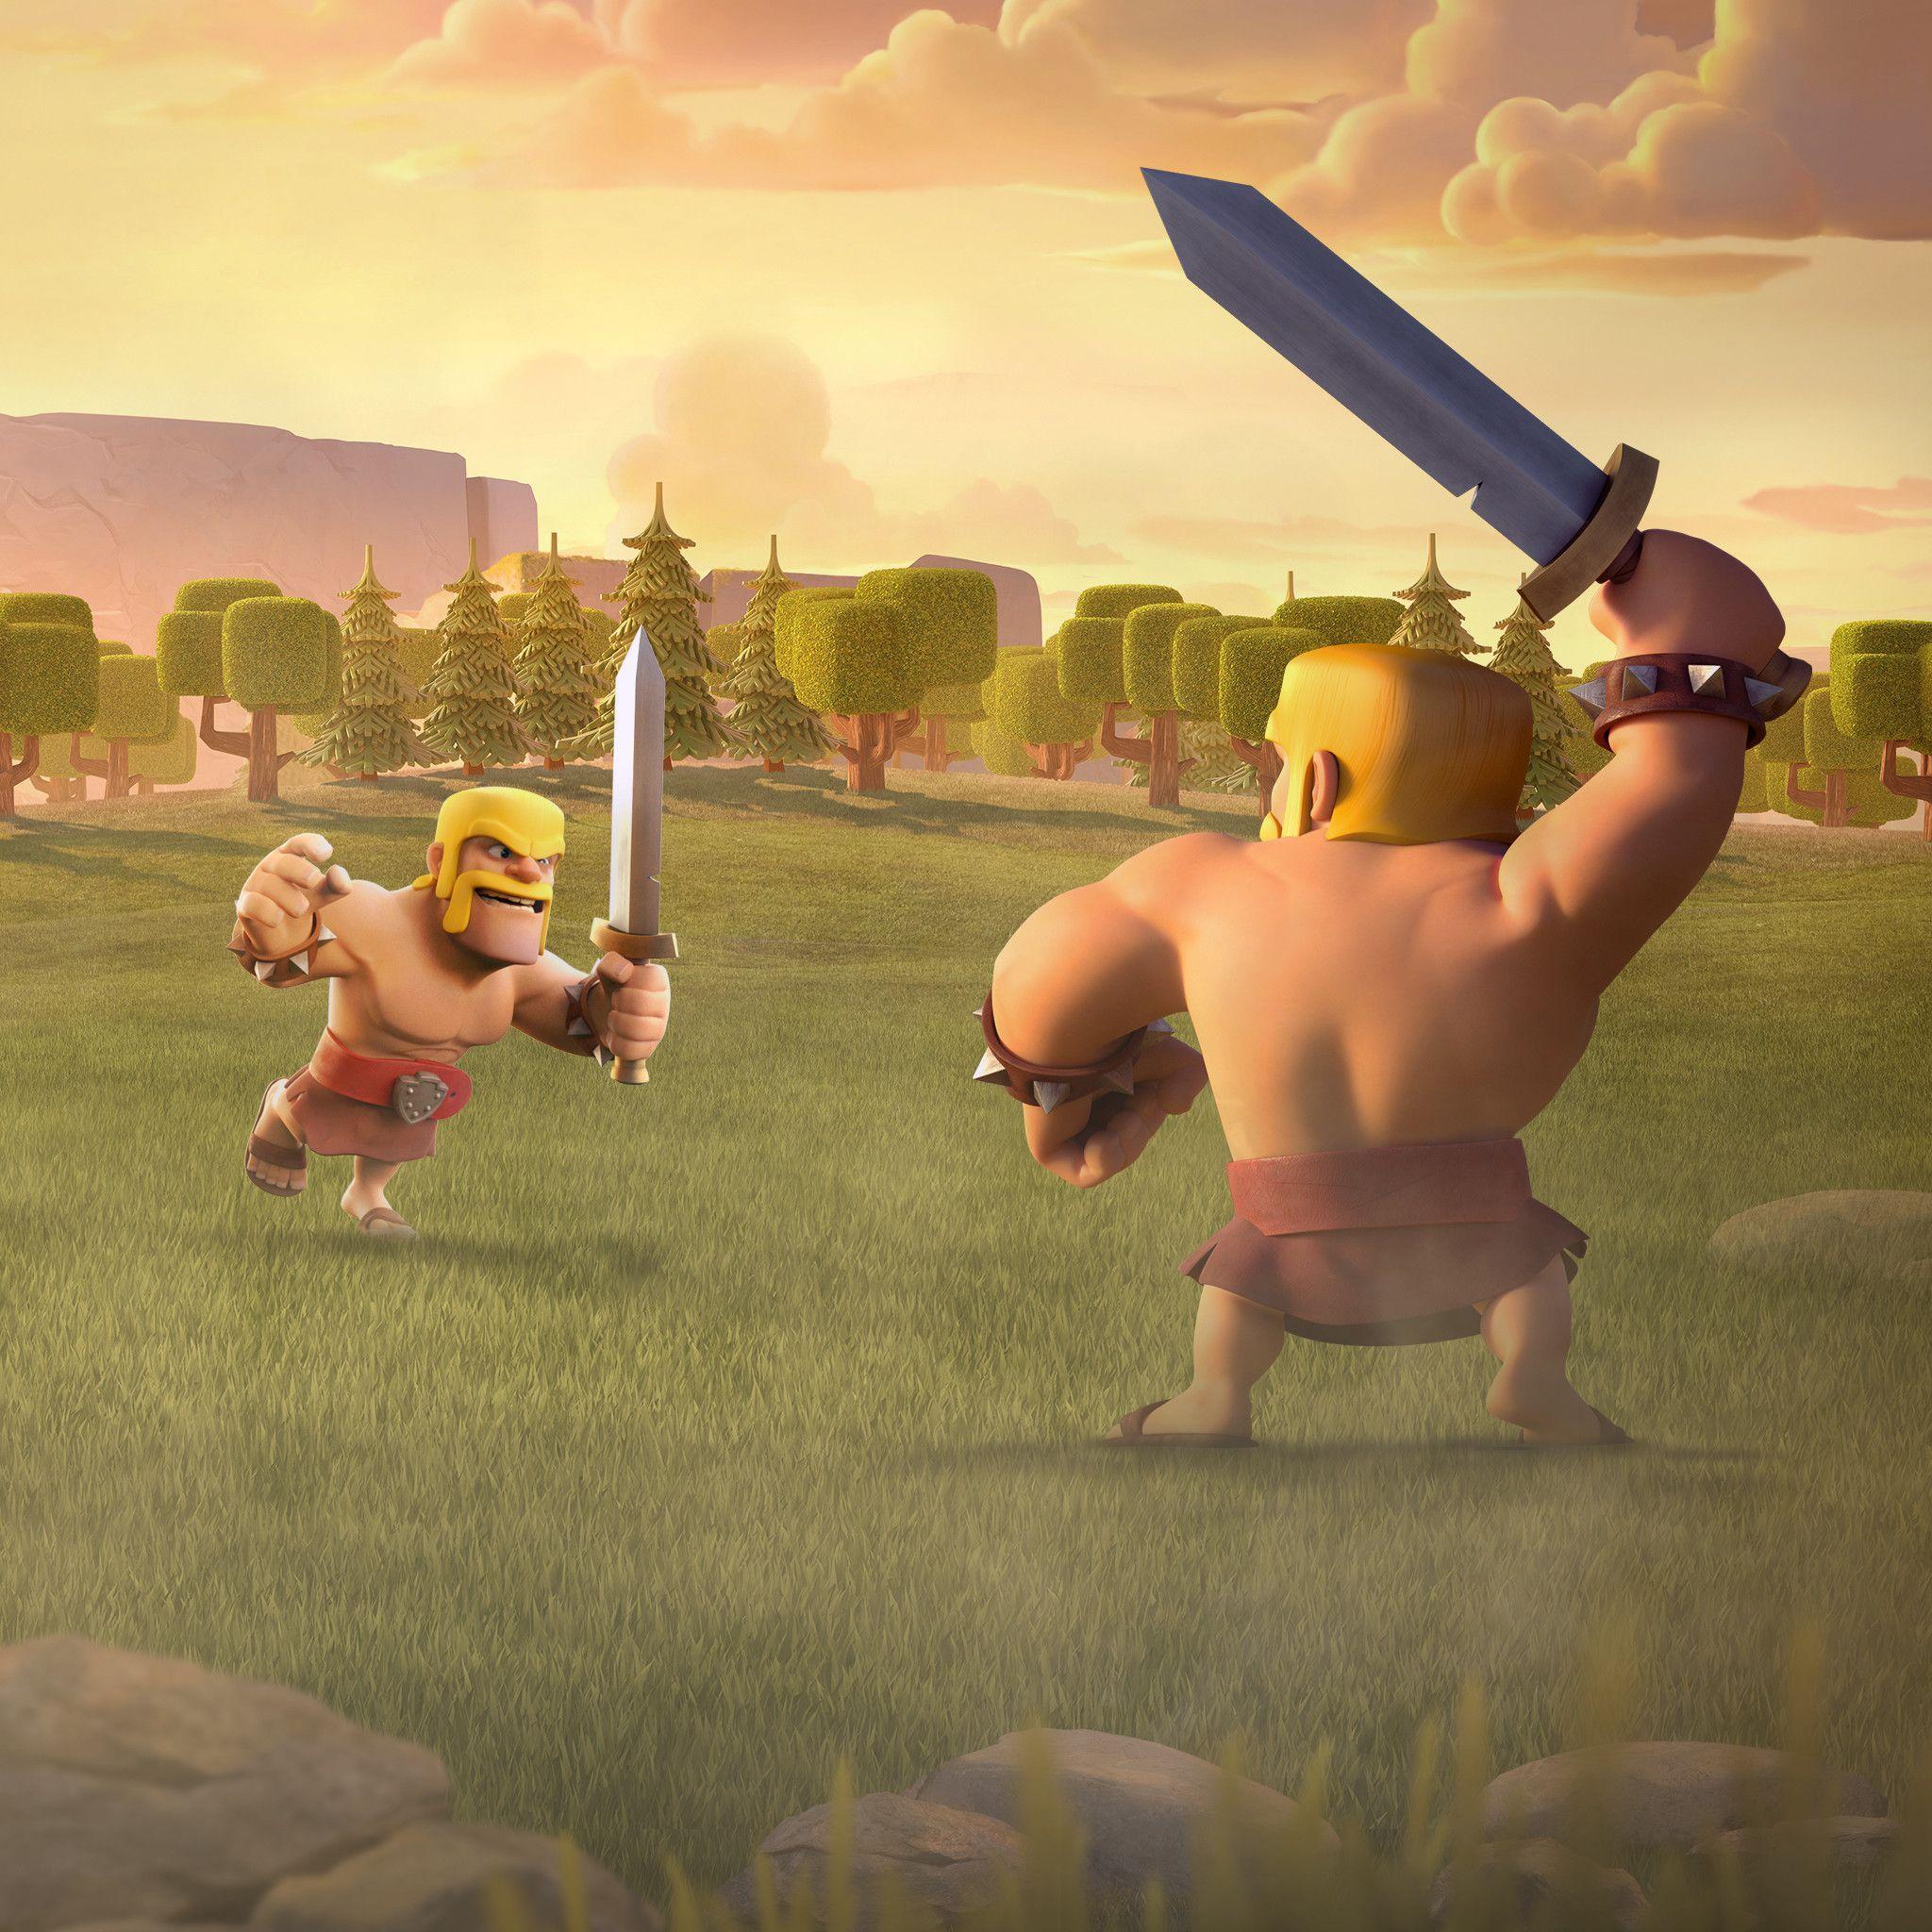 Clash of Clans iOS and Android Mobile Strategy War Game